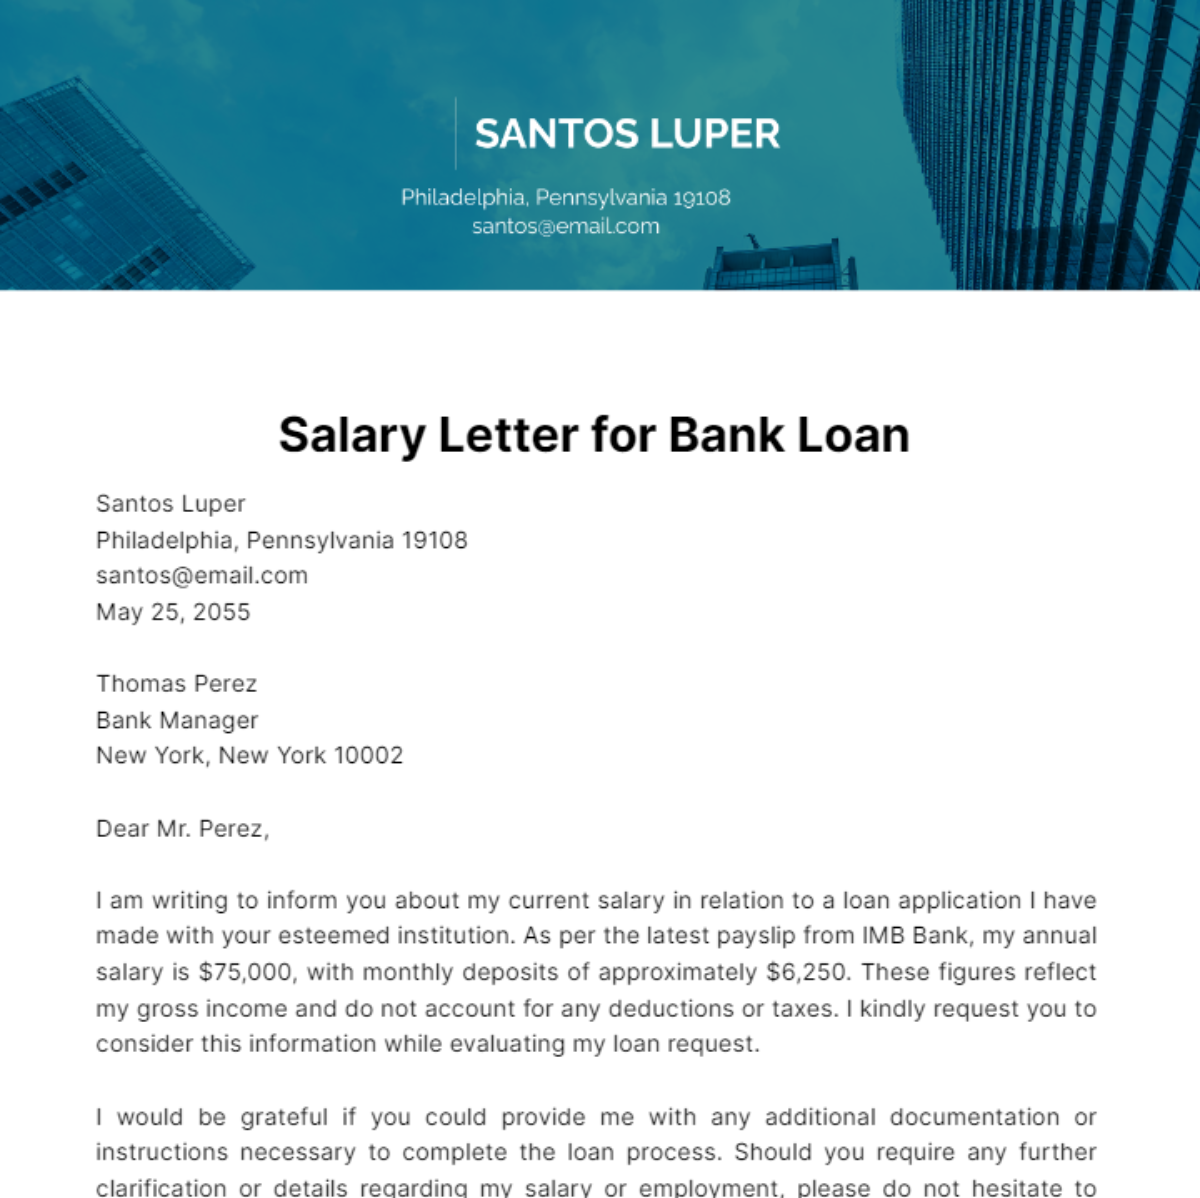 Salary Letter for Bank Loan Template